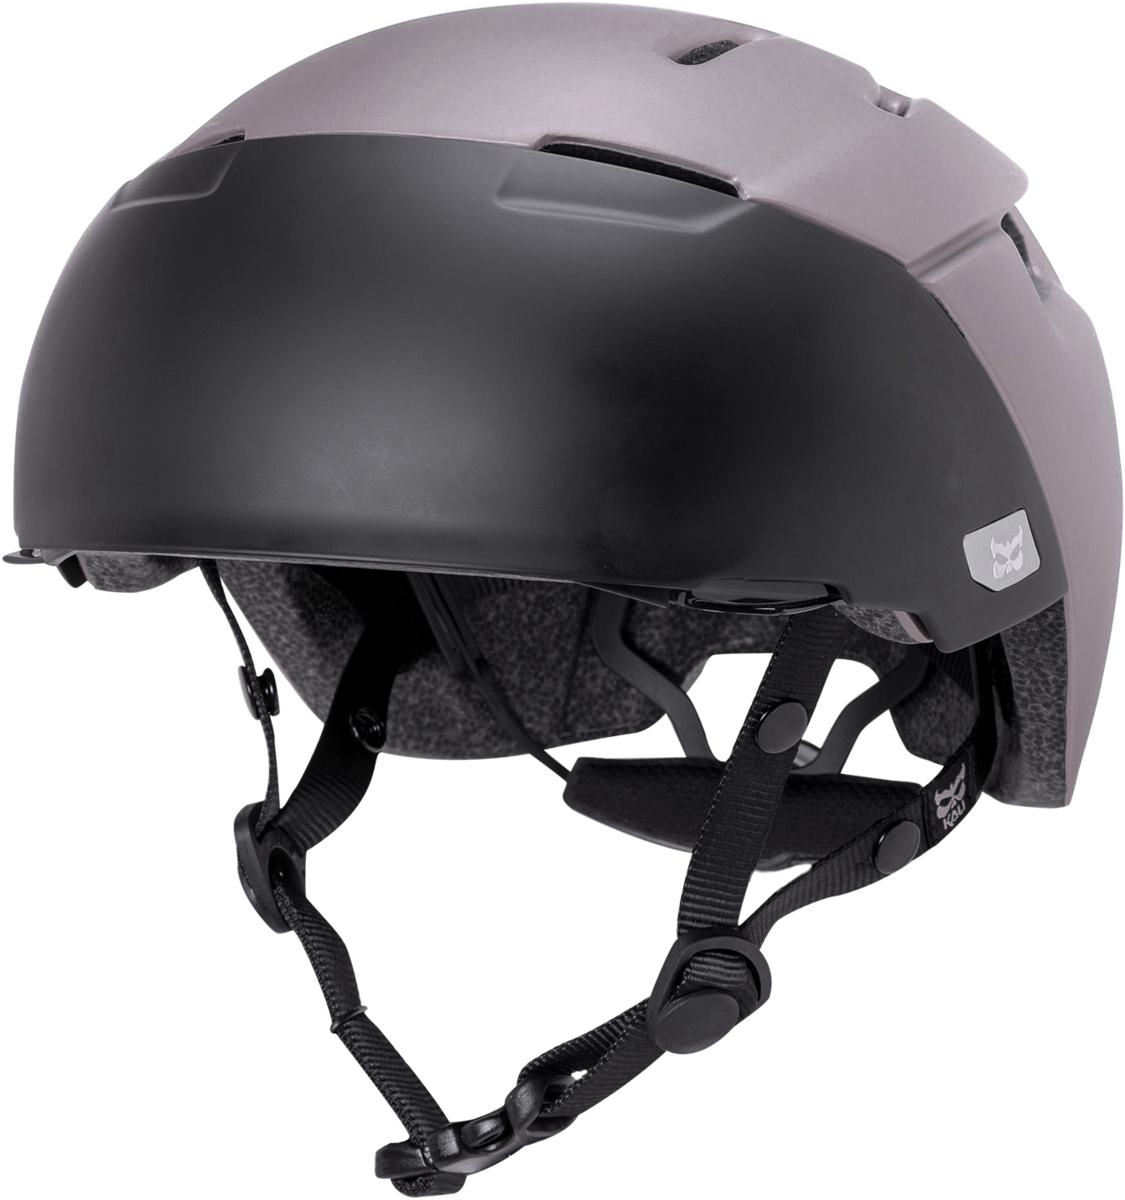 Details about   Kali Protectives City Urban Road Bike Bicycle Helmet S-XL 